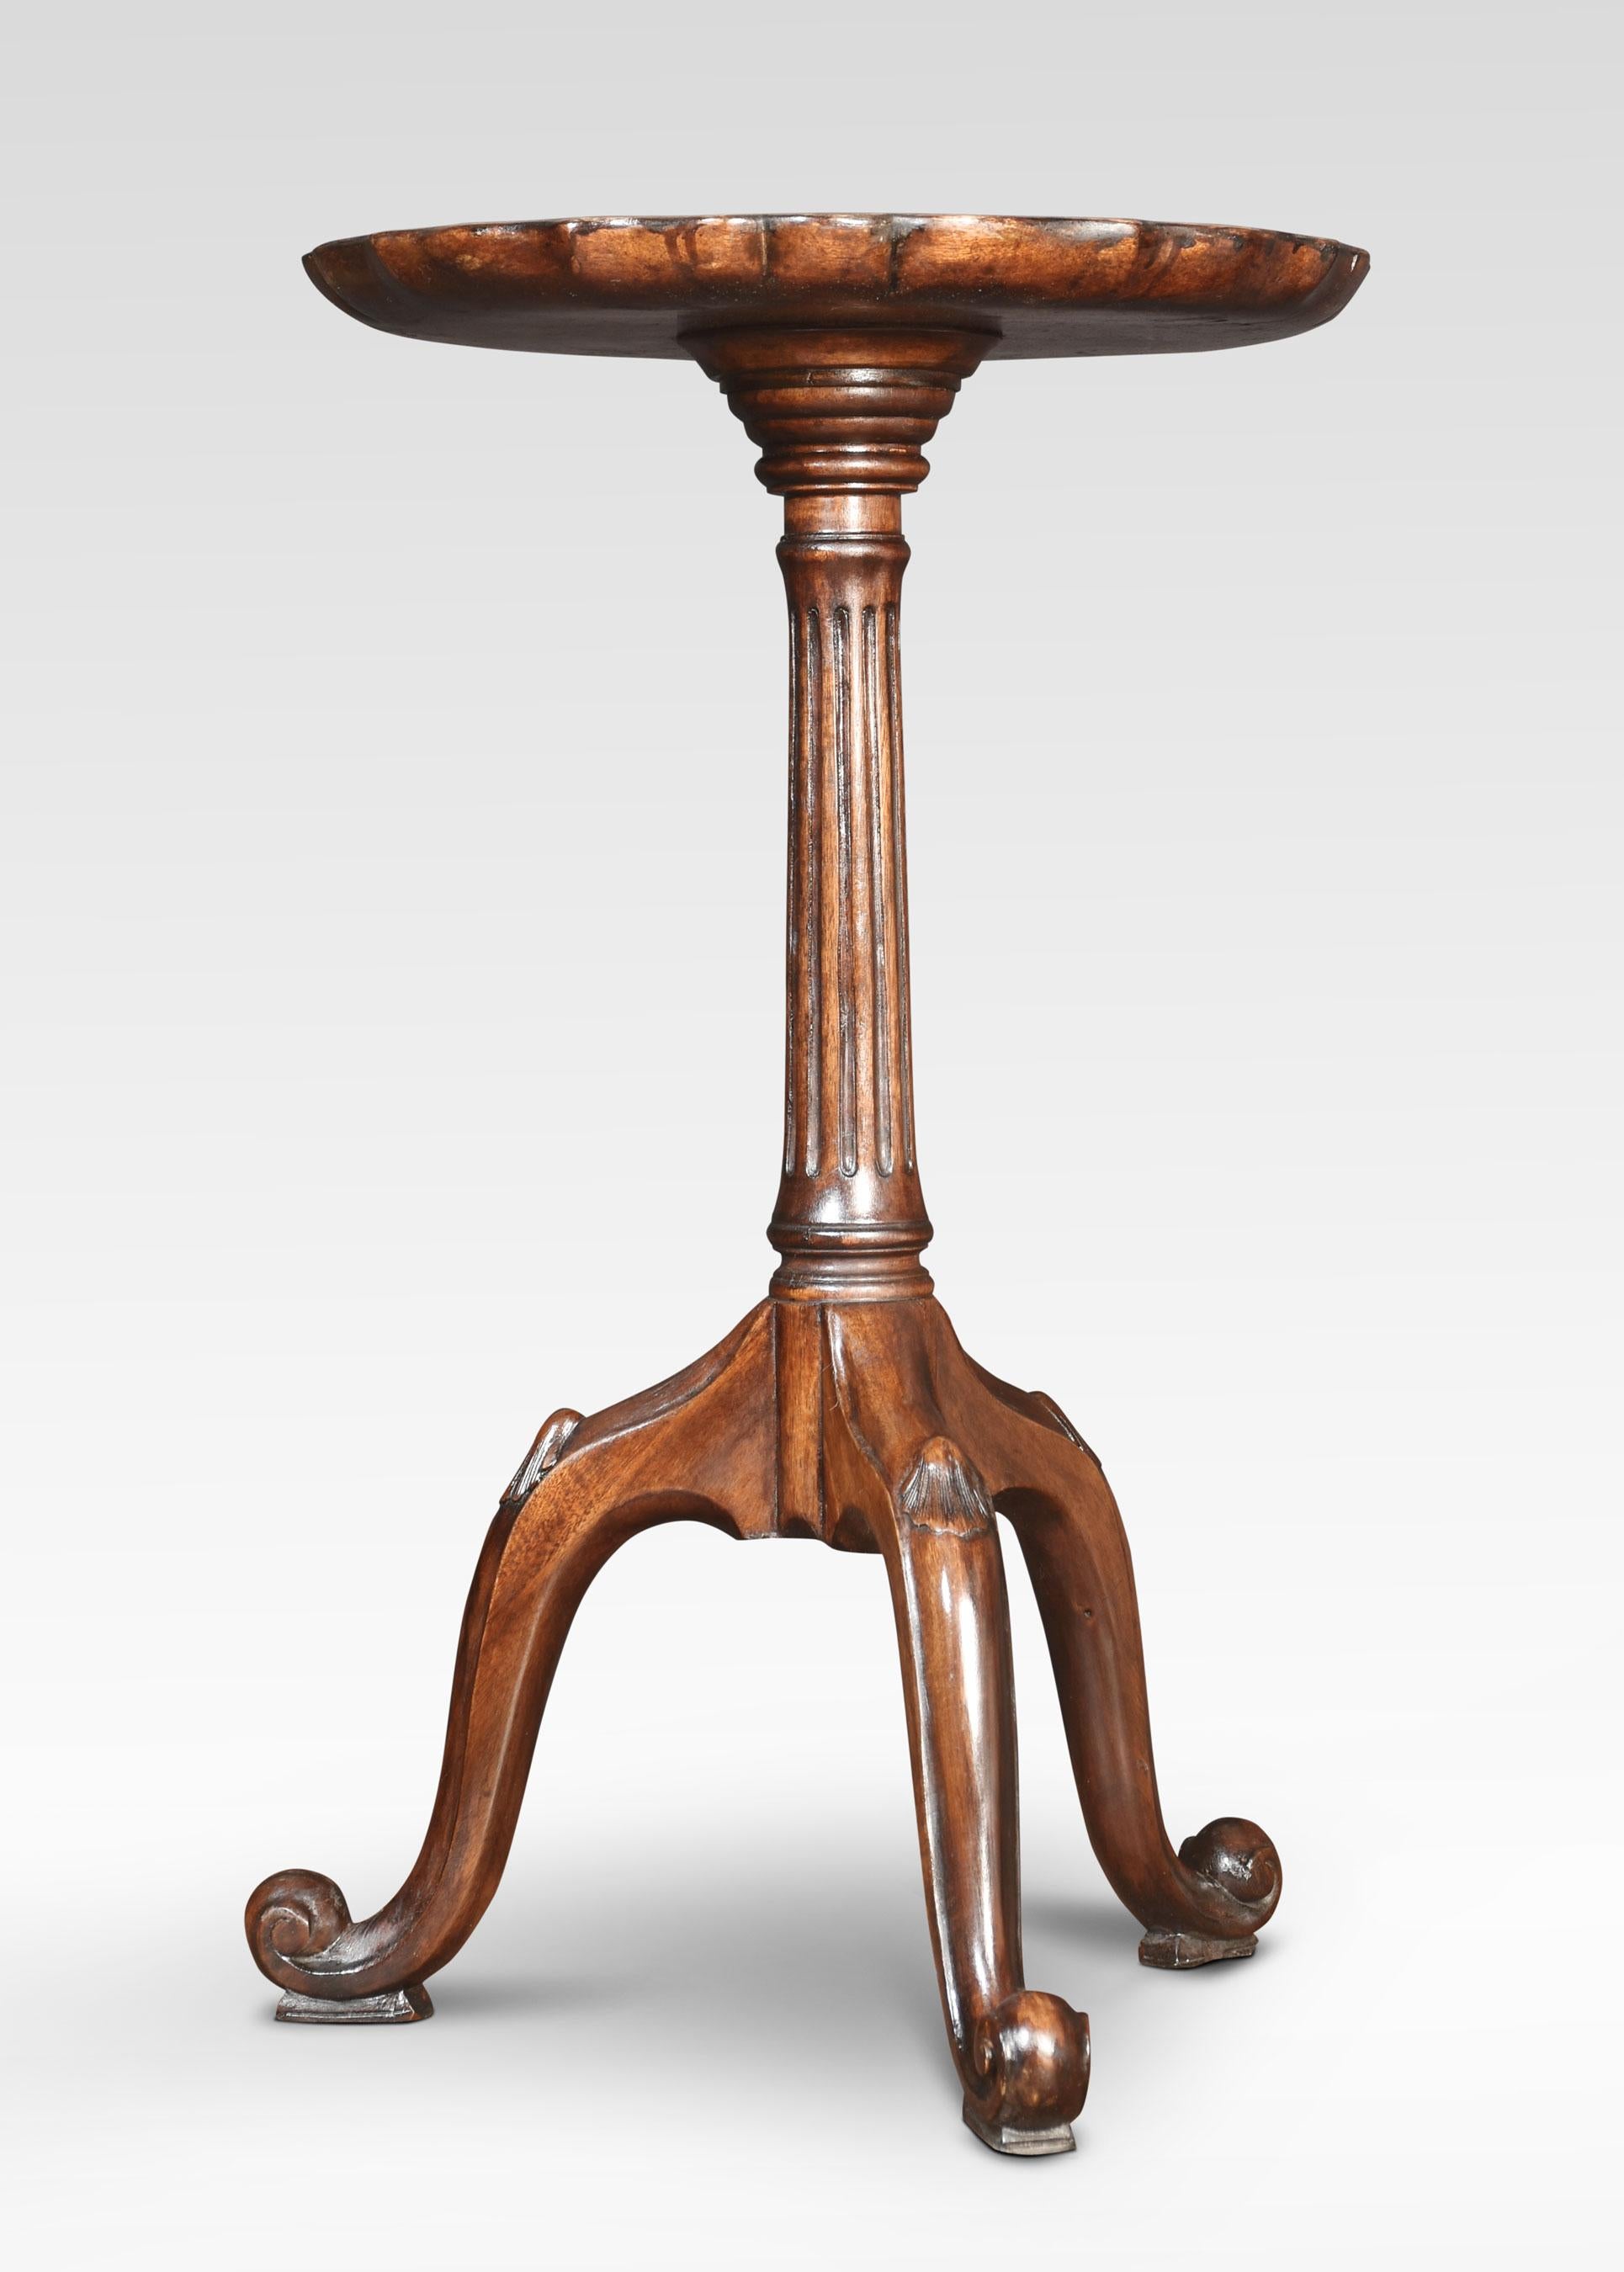 Pair of side tables the circular shell carved tops raised up on turned reeded stems supported on three down-swept supports terminating in scrolling toes.
Dimensions
Height 23.5 Inches
Width 14.5 Inches
Depth 14.5 Inches